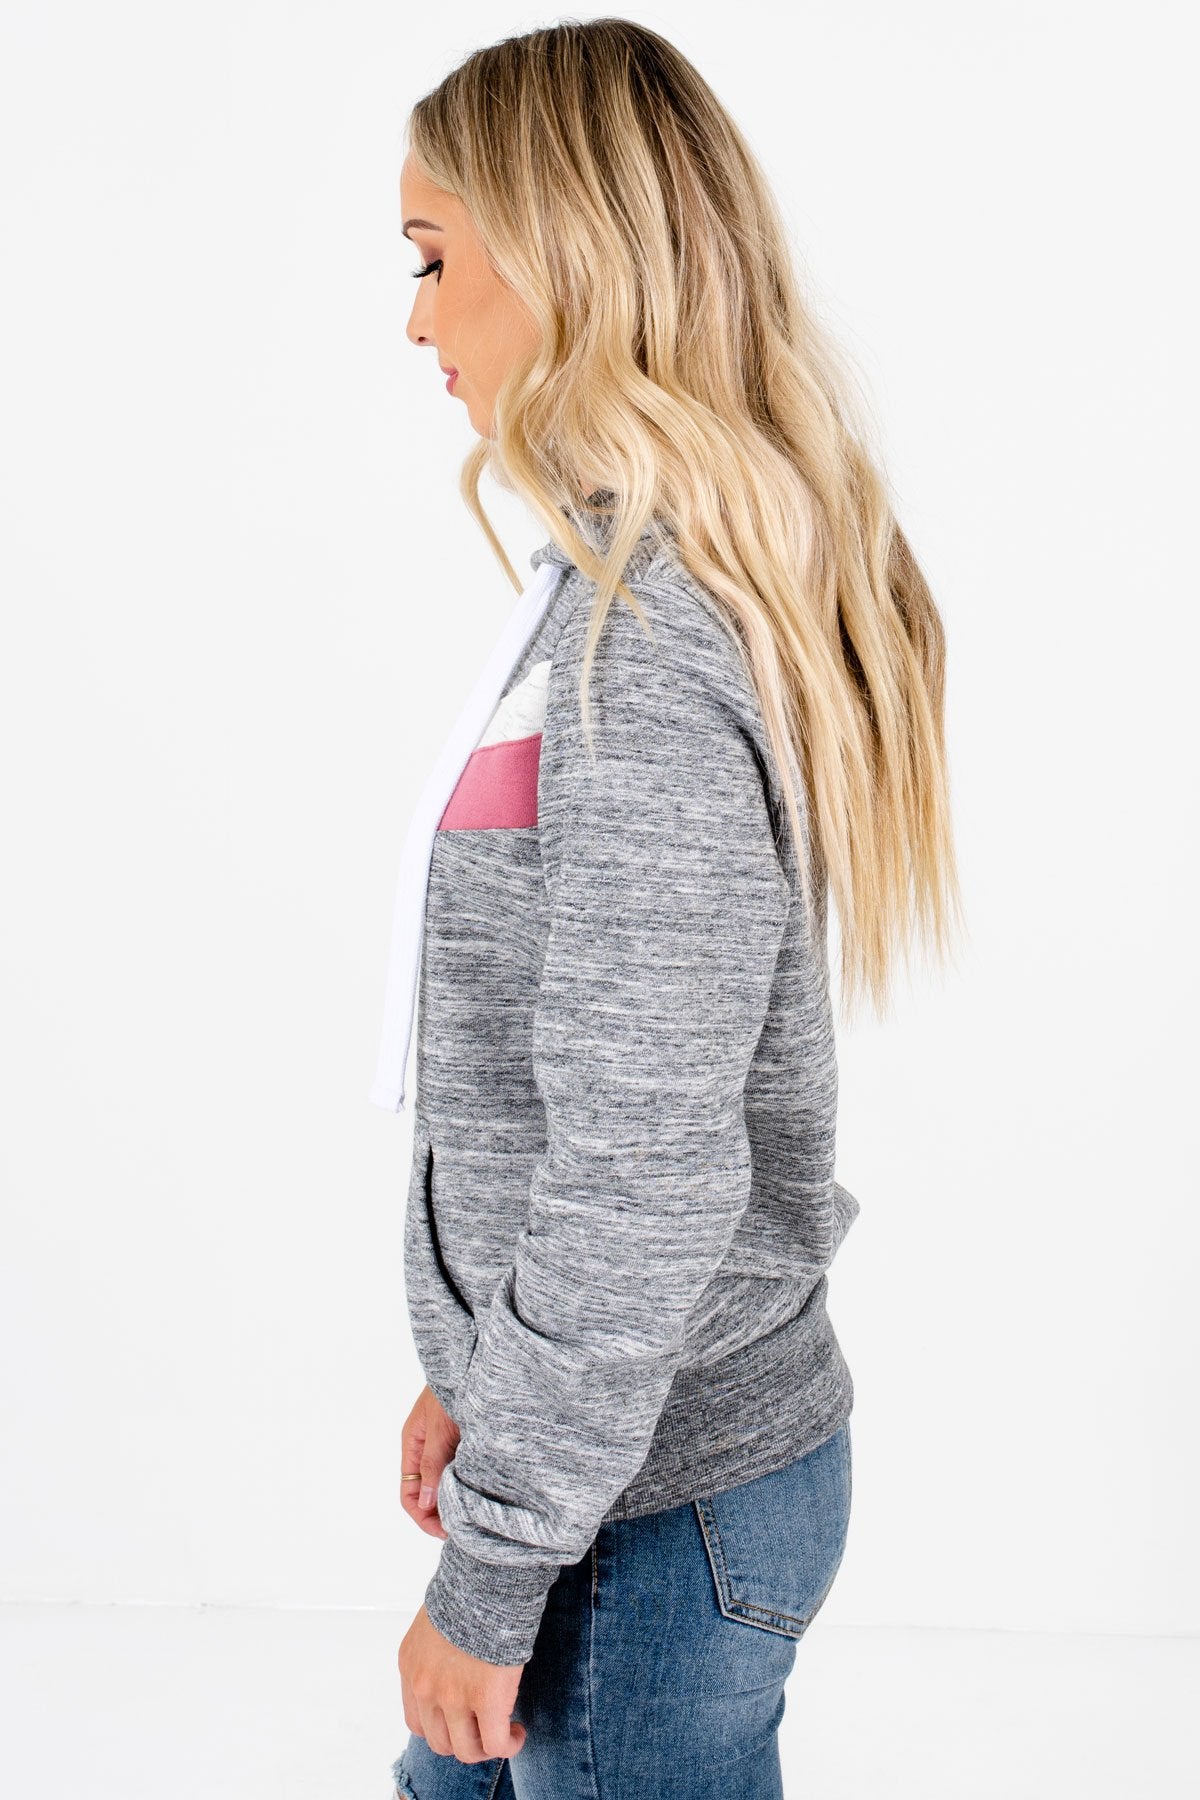 Heather Gray Front Pocket Boutique Hoodies for Women